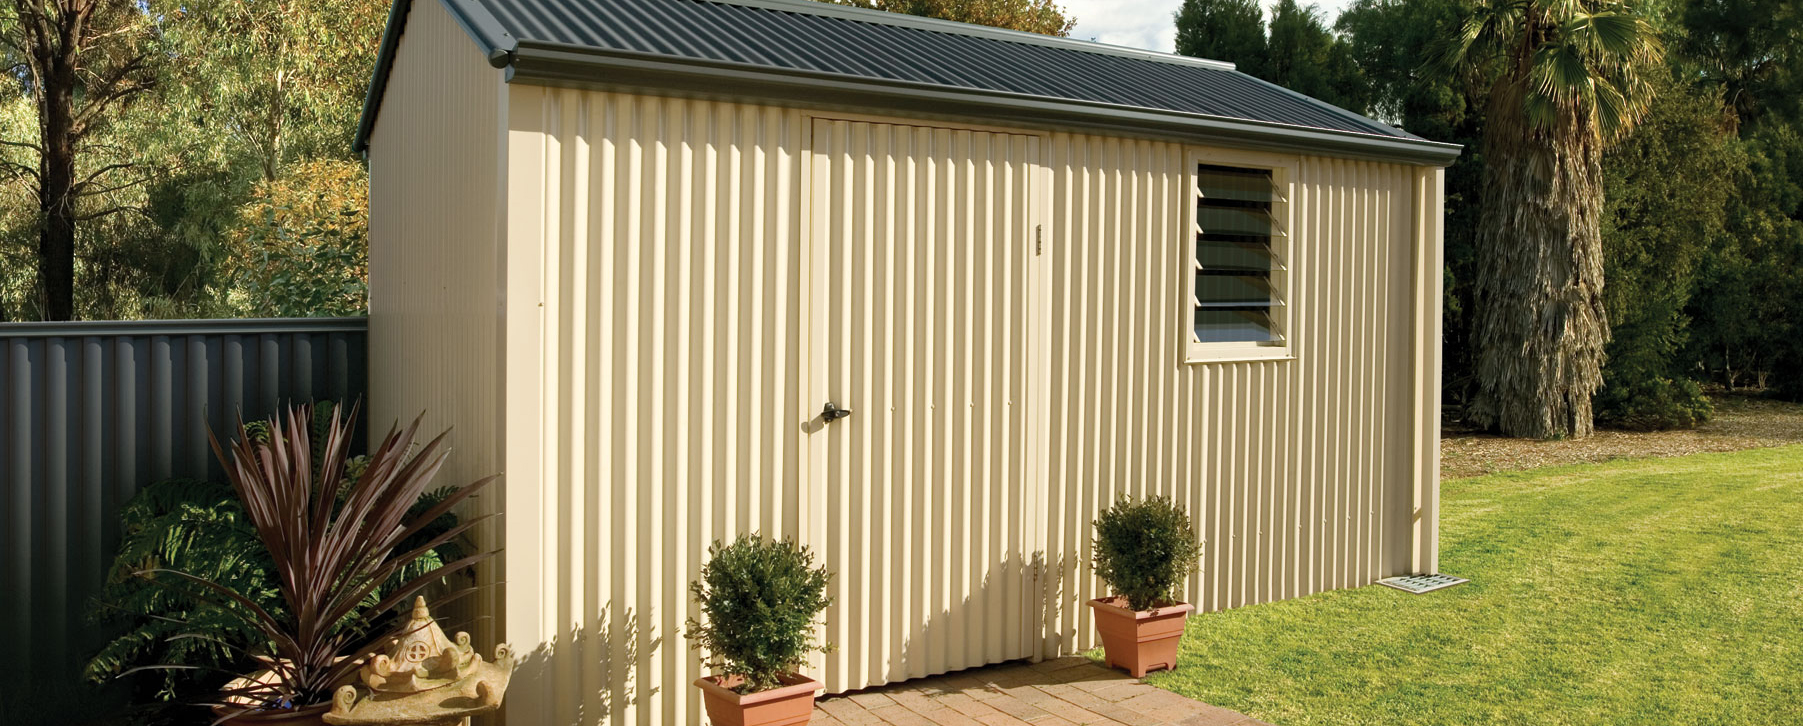 Garden Sheds Perth | Aussie Outdoor Sheds | Stratco Sheds ...